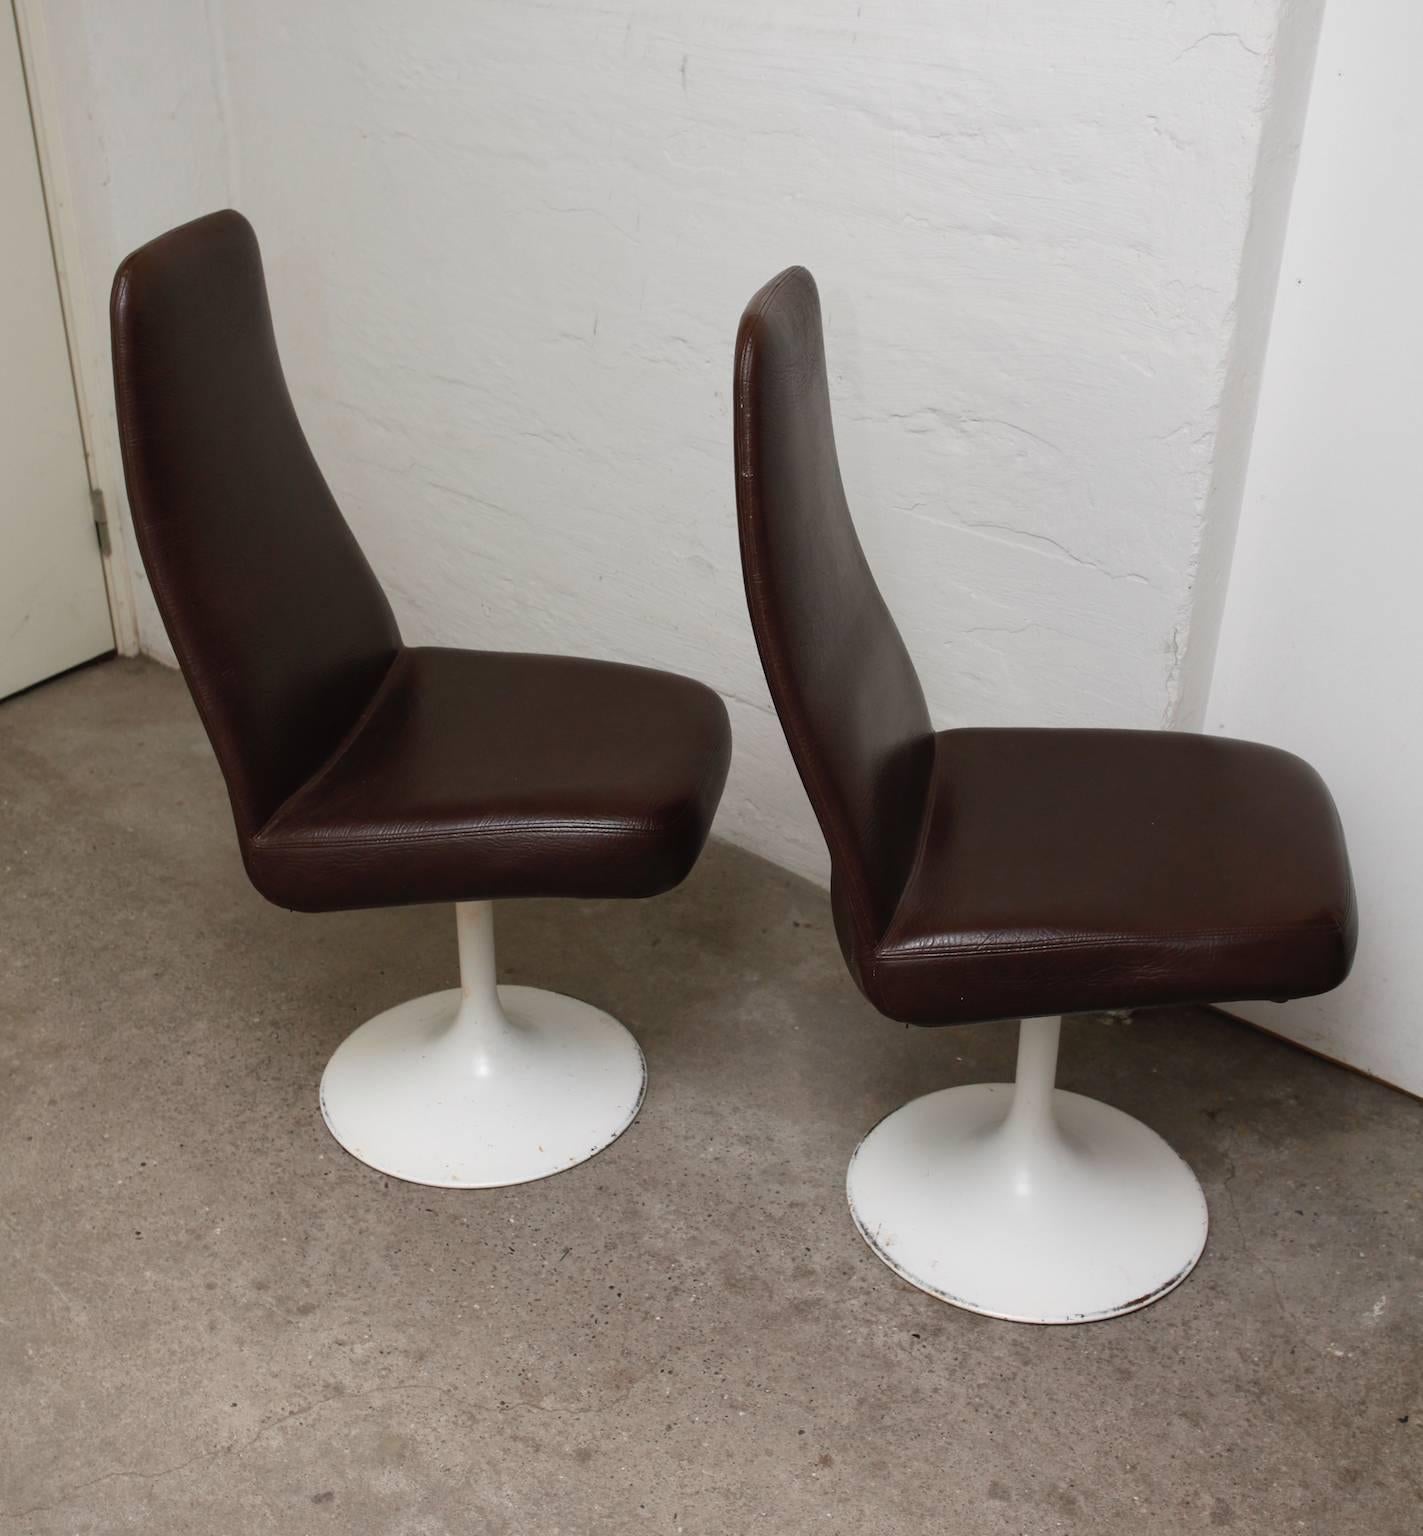 Steel Two Chairs with Matching Table and Tulip foot by Johanson Design, Sweden, 1970s For Sale